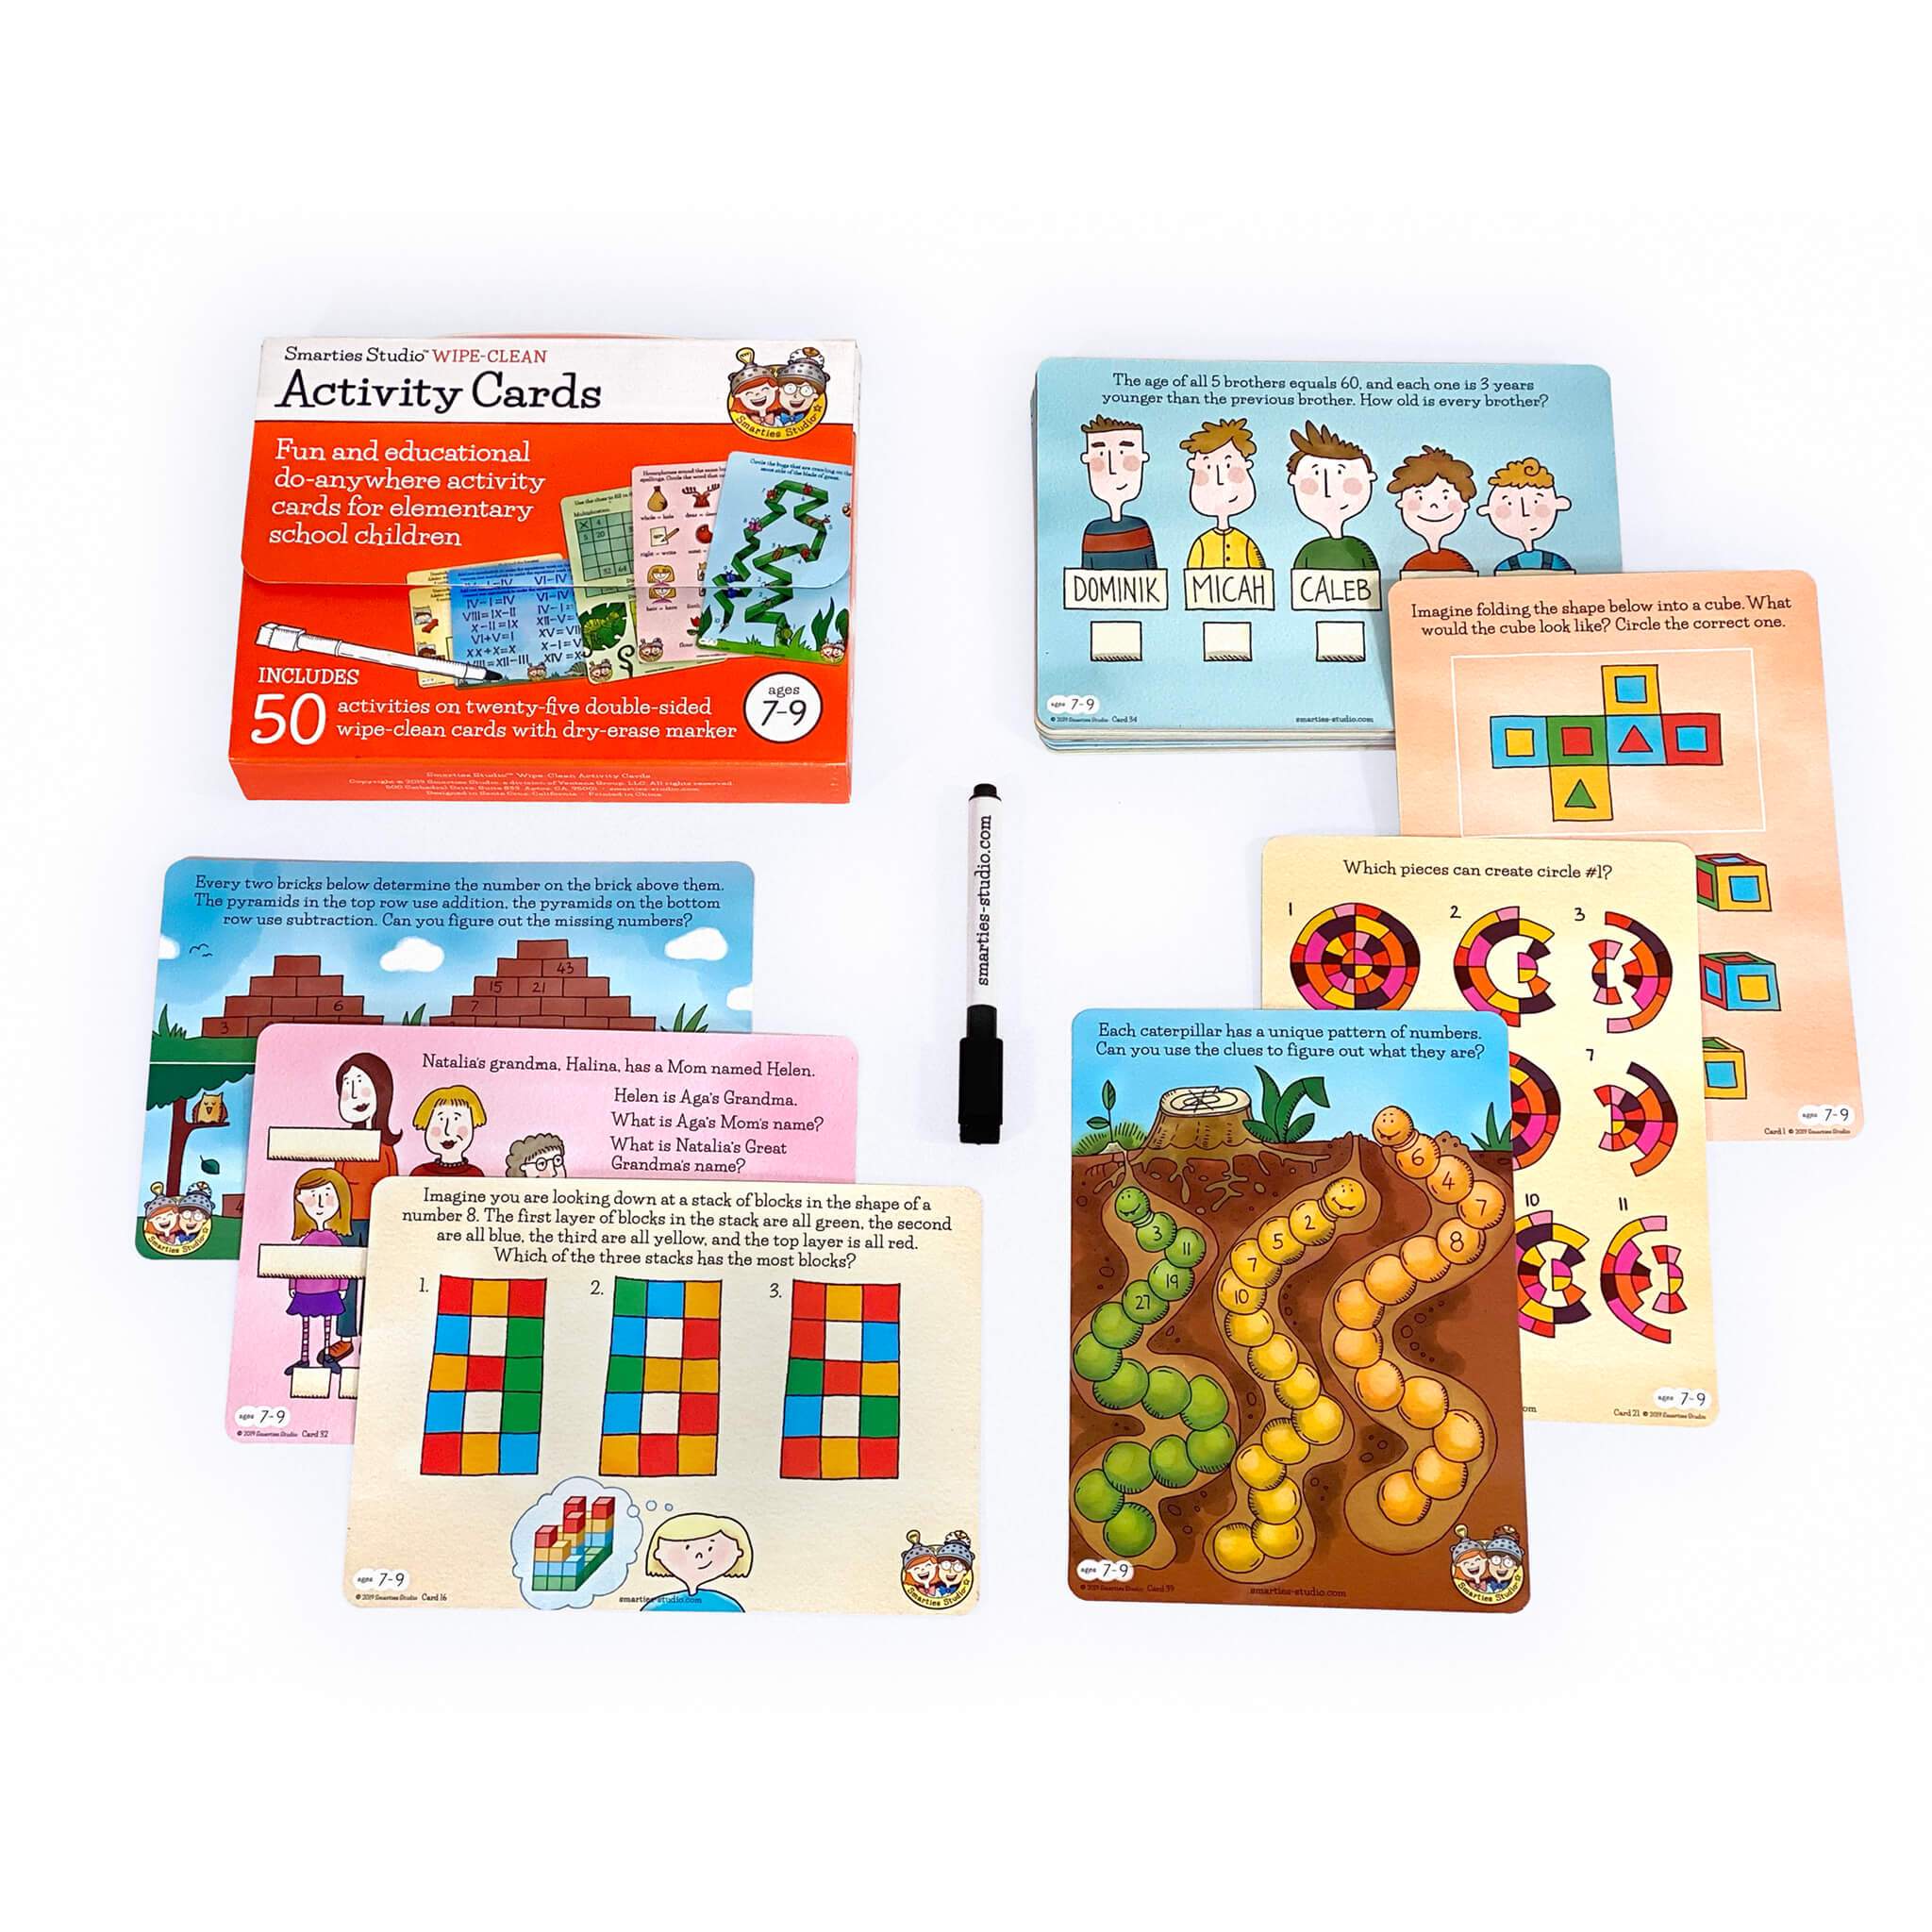 Smarties Studio Wipe Clean Activity Cards for Ages 7-9 ~ Breakout